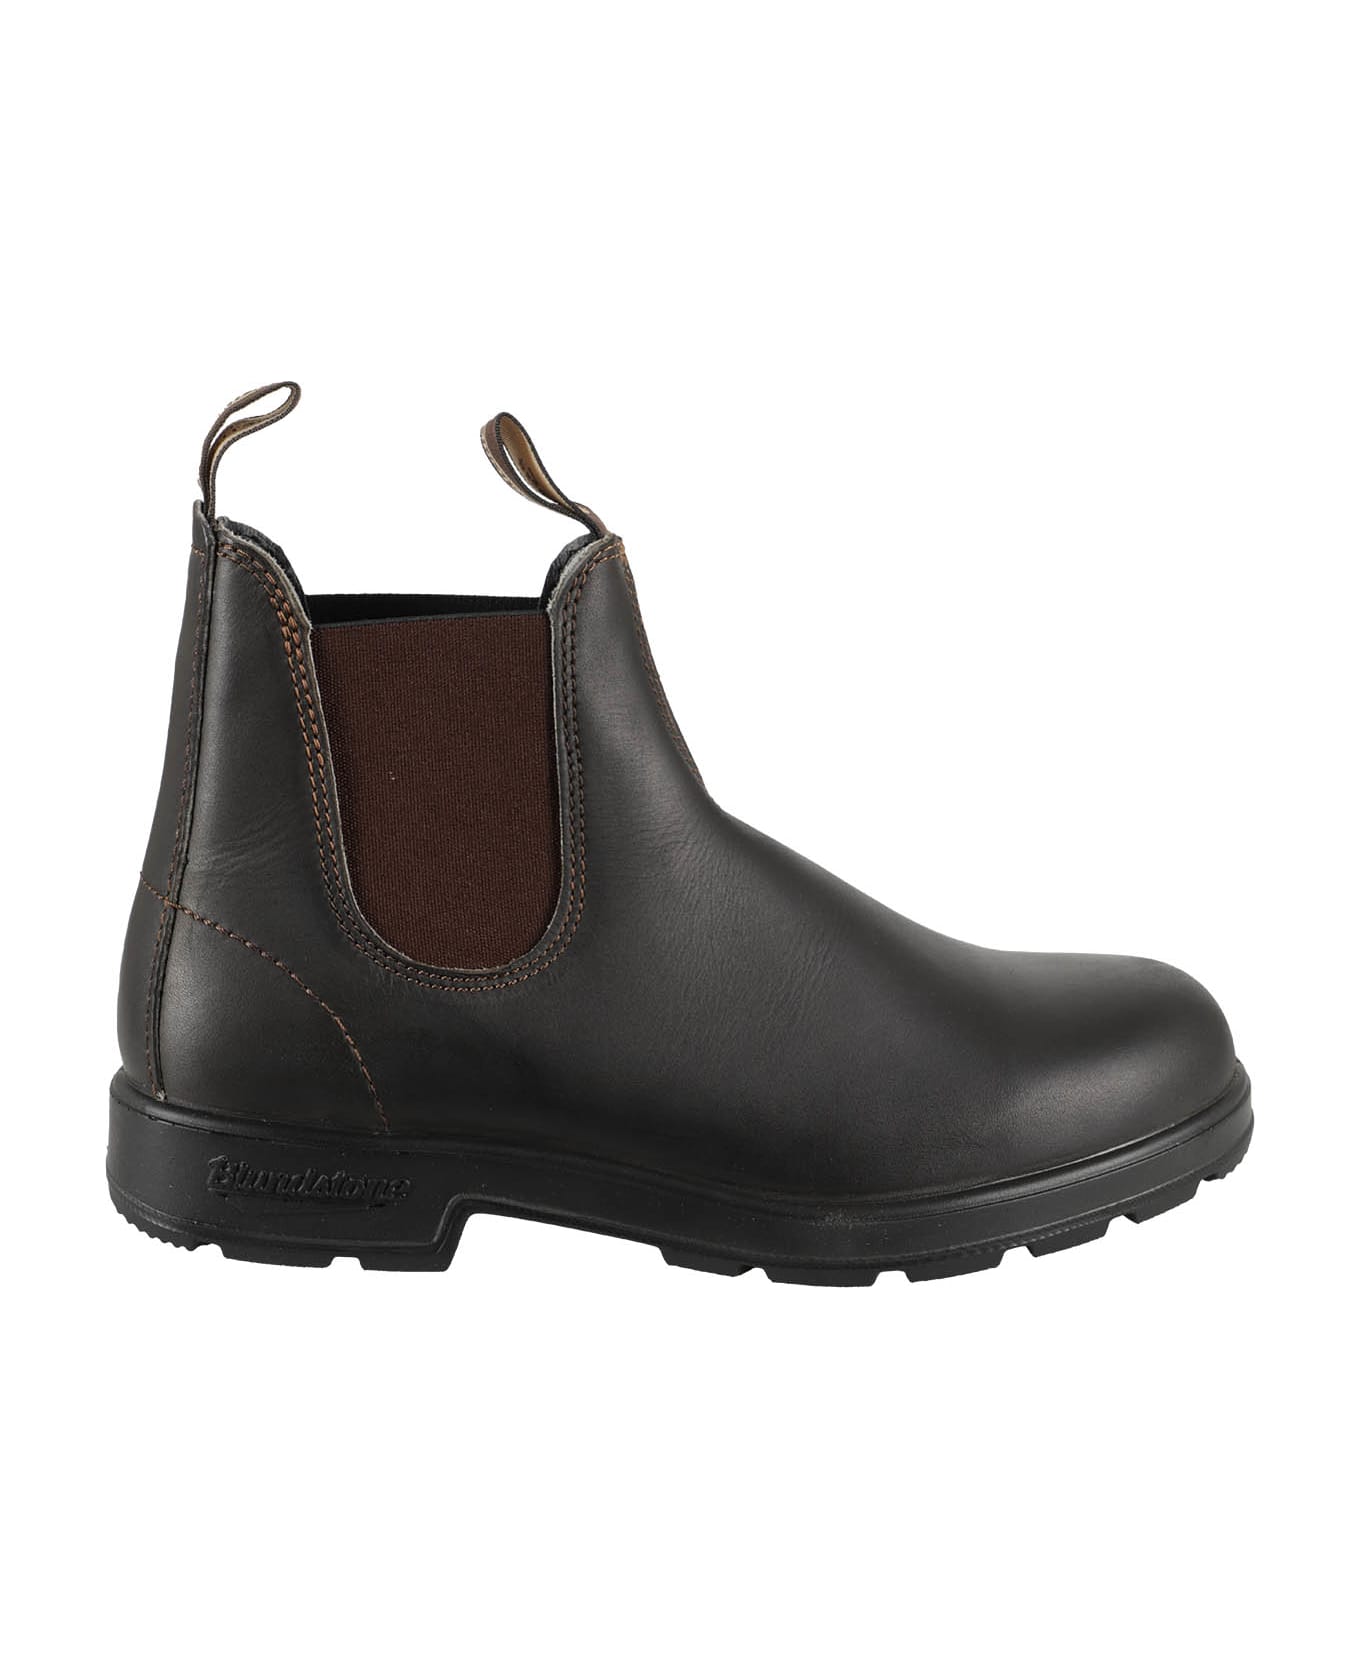 Blundstone Leather - Stout Brown Brown ブーツ